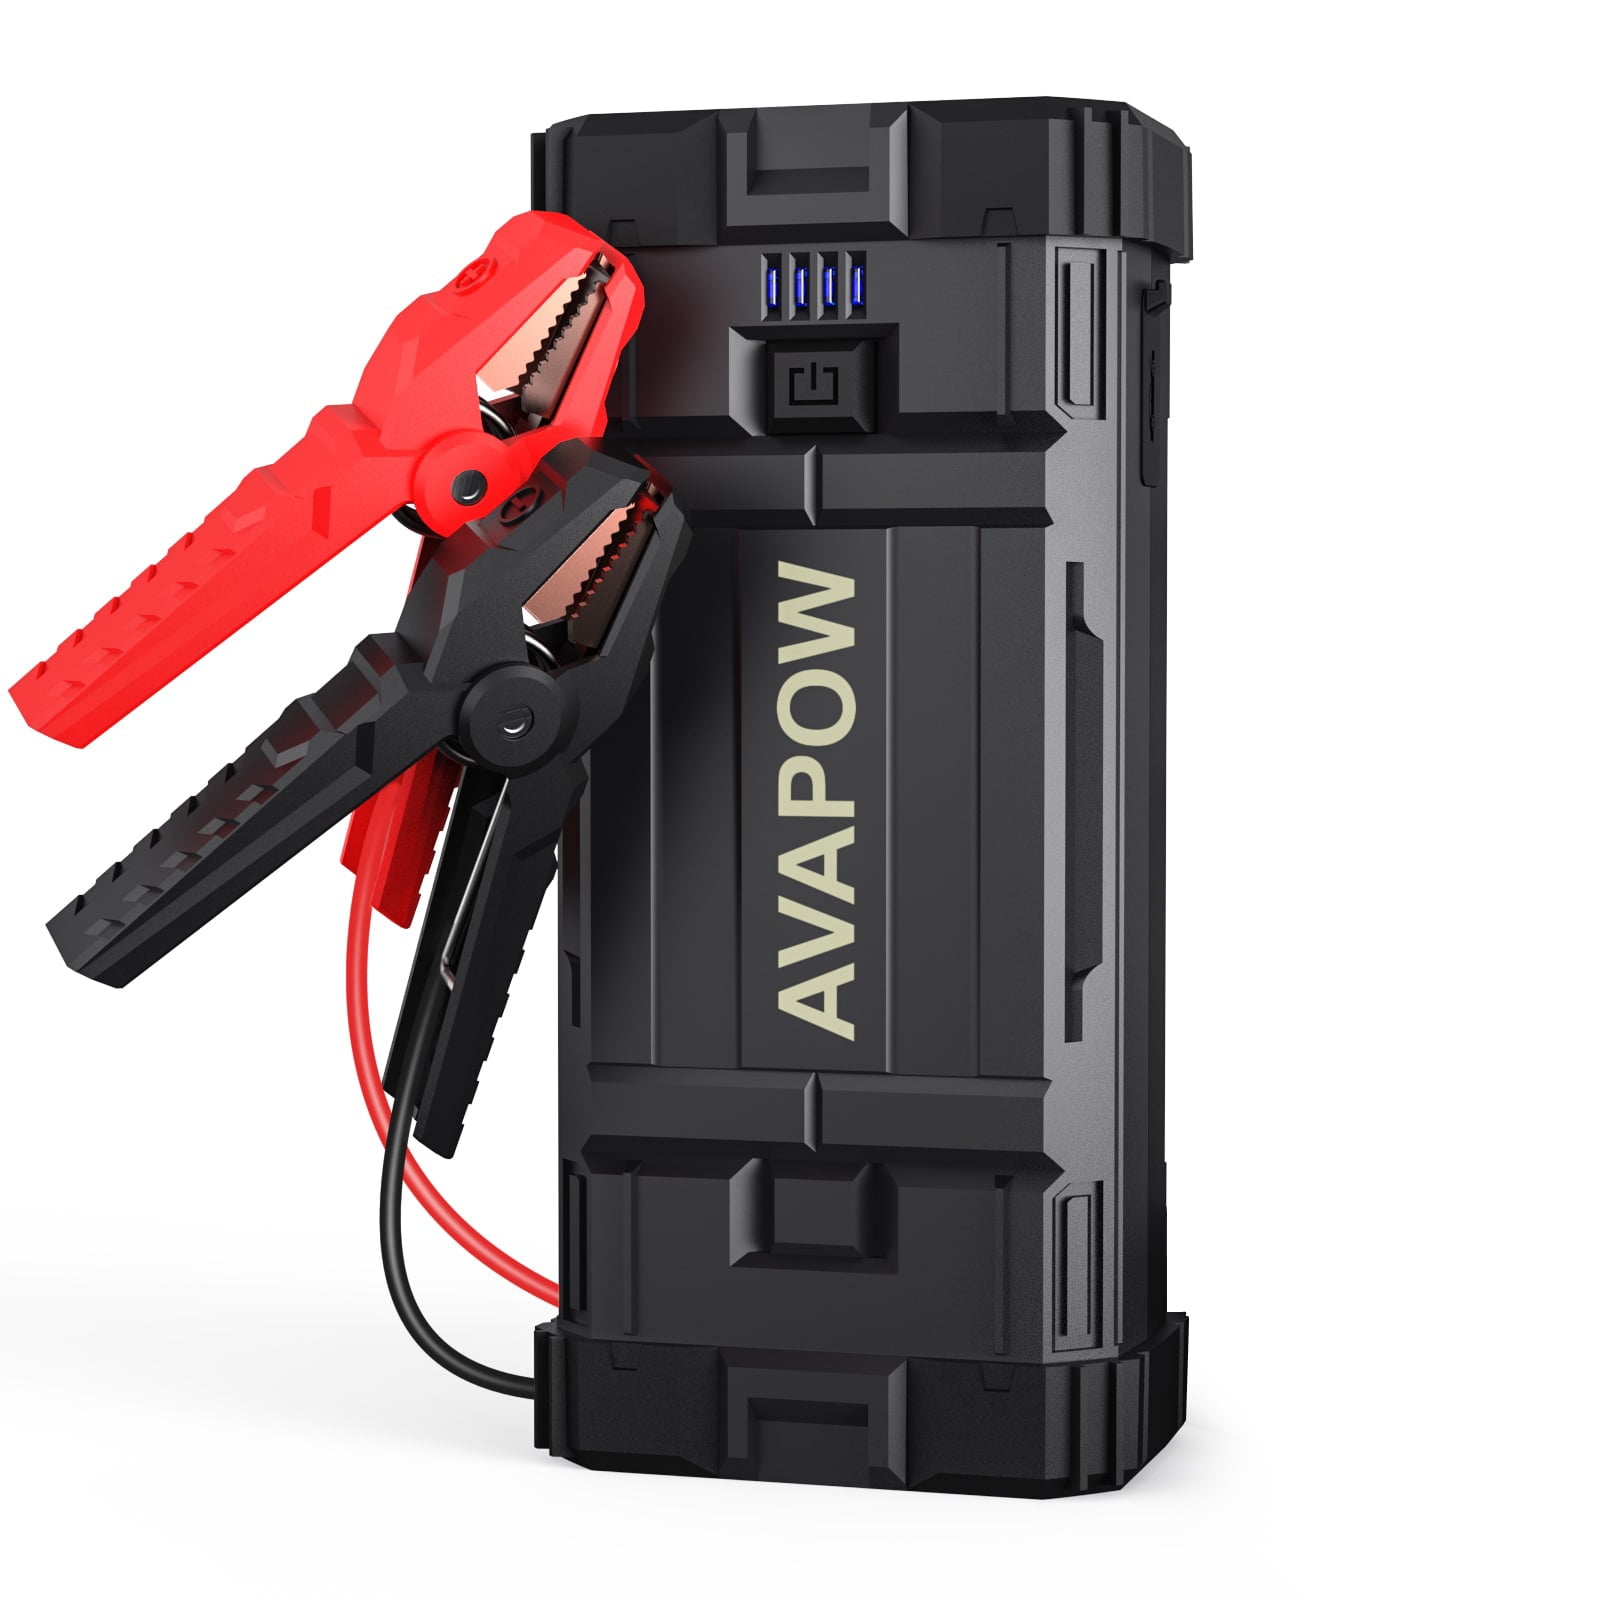 AVAPOW Car Jump Starter, 1500A Peak 12800mAh Battery Starter (Up to 6.0L Gas and 5.5L Diesel Engine), 12V Auto Battery Booster for Car